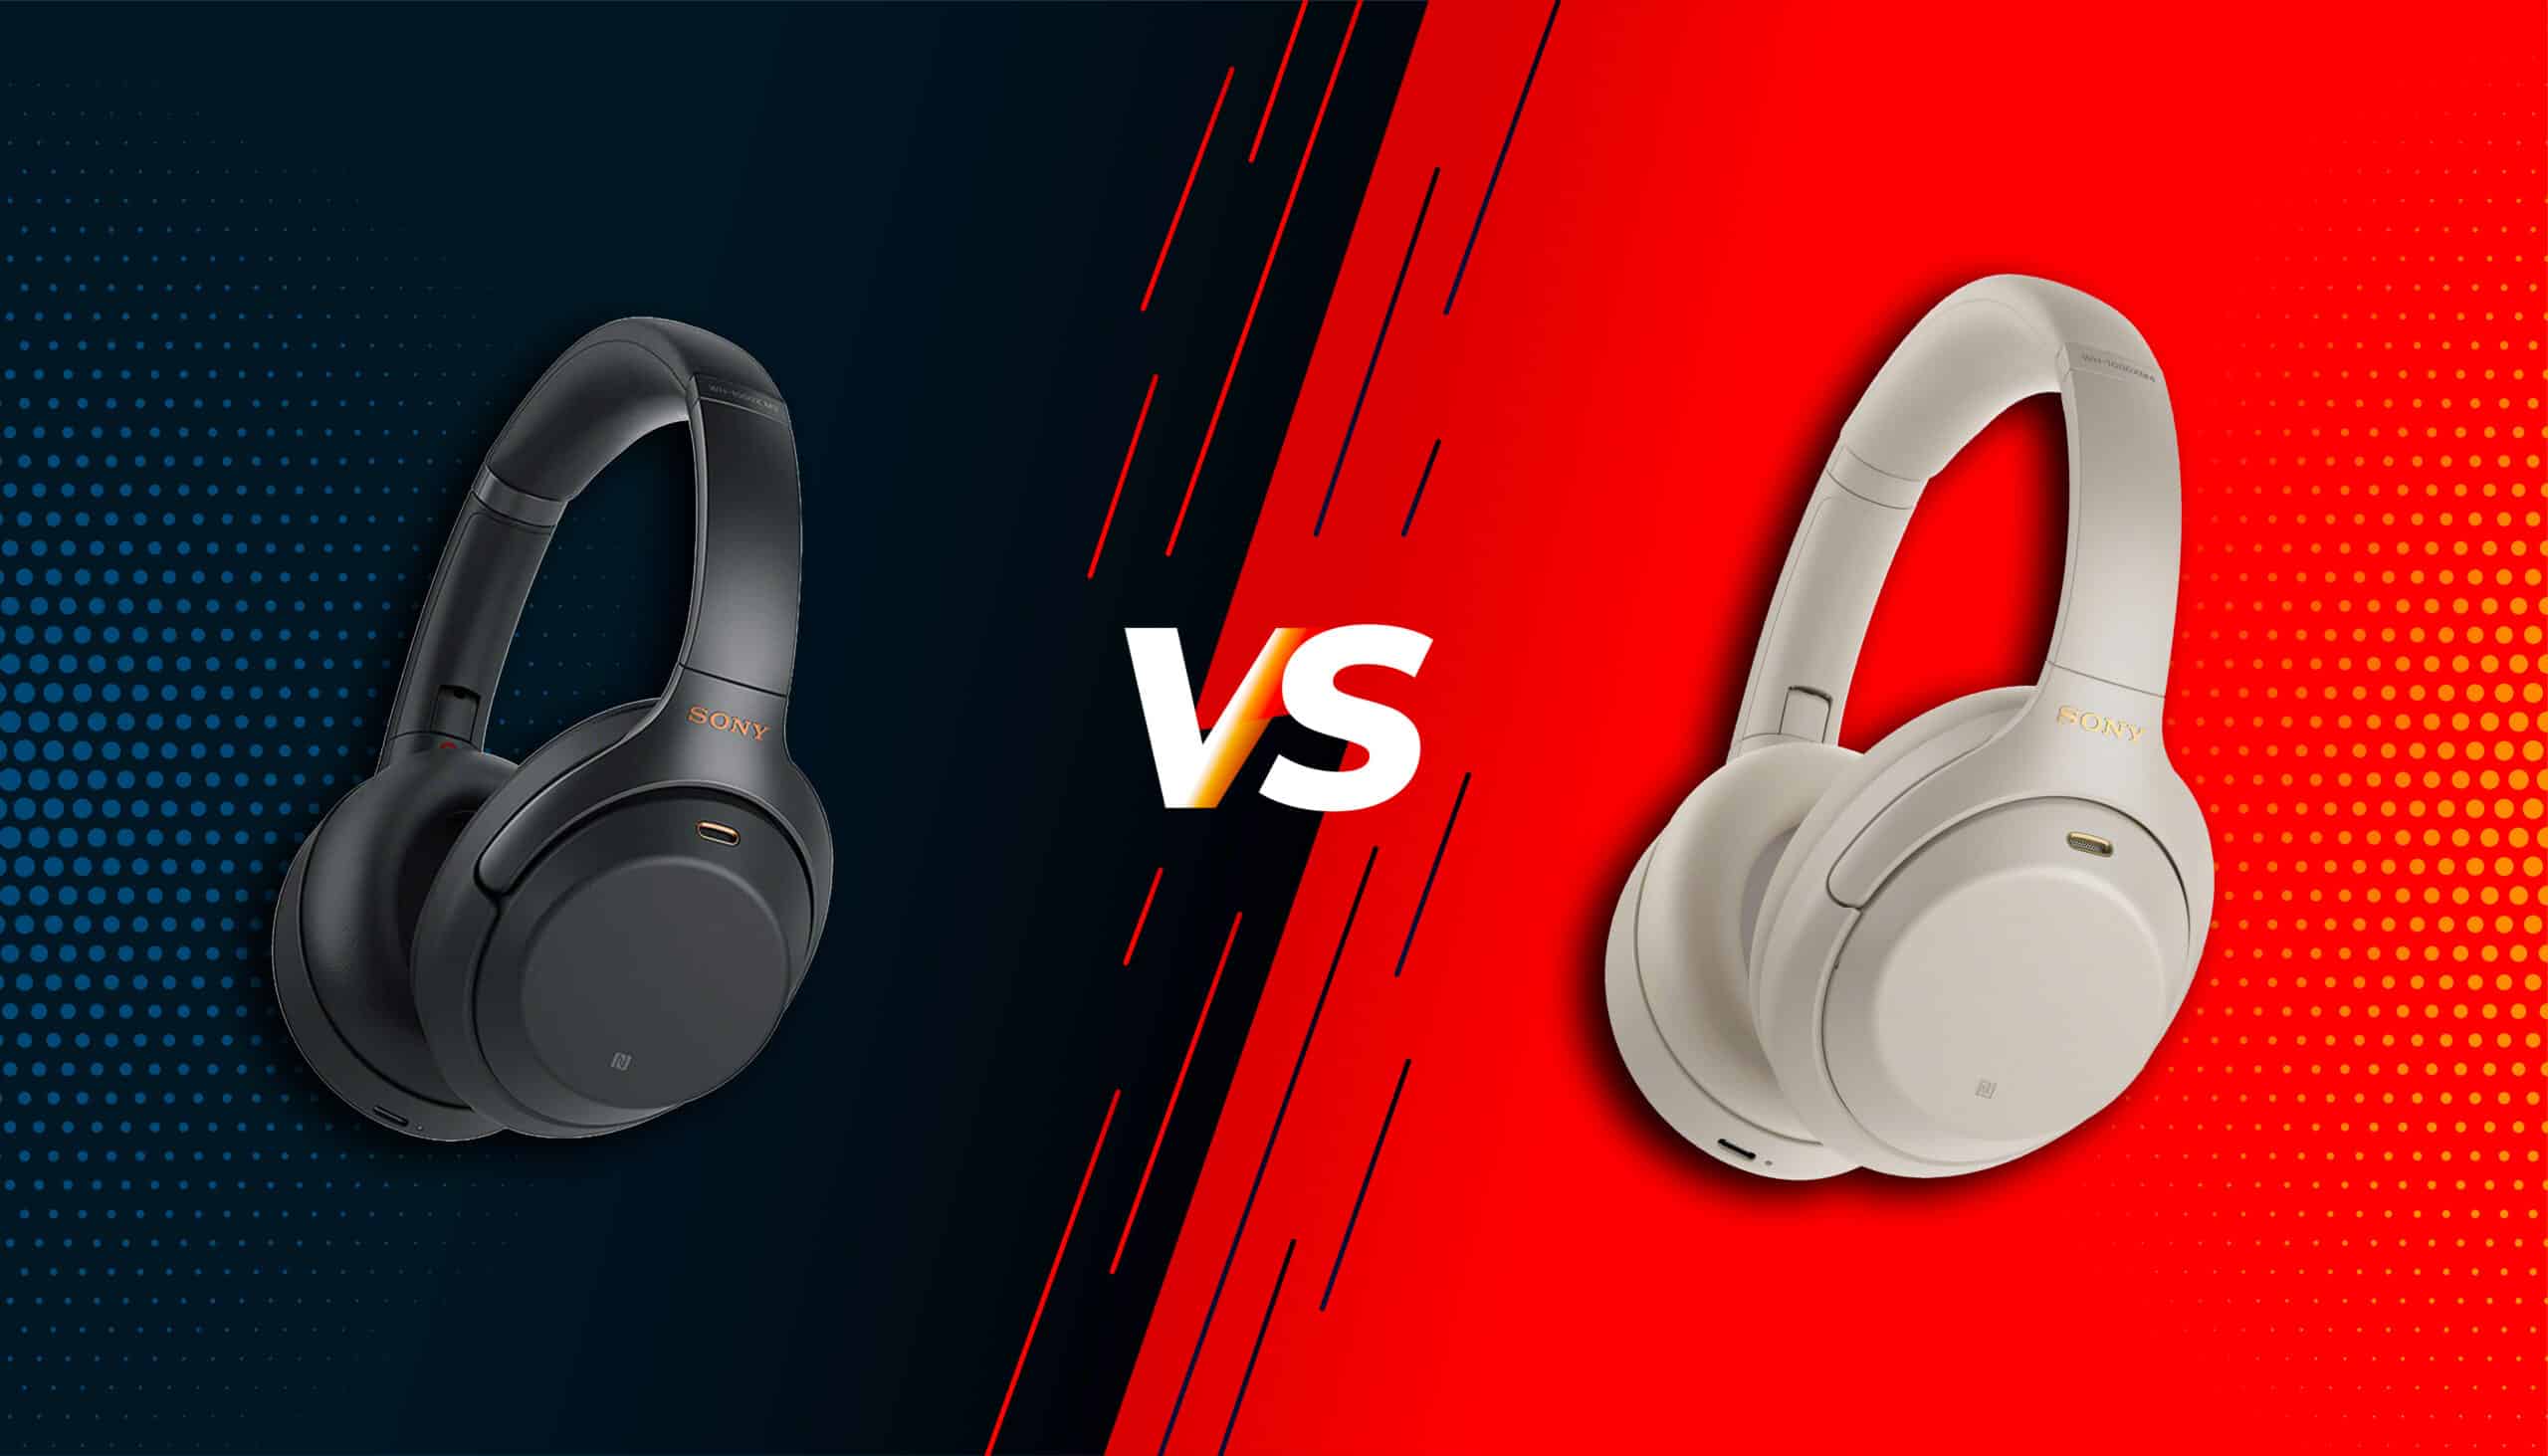 Sony's WH-1000XM4 vs WH-1000XM3: What's The Difference?